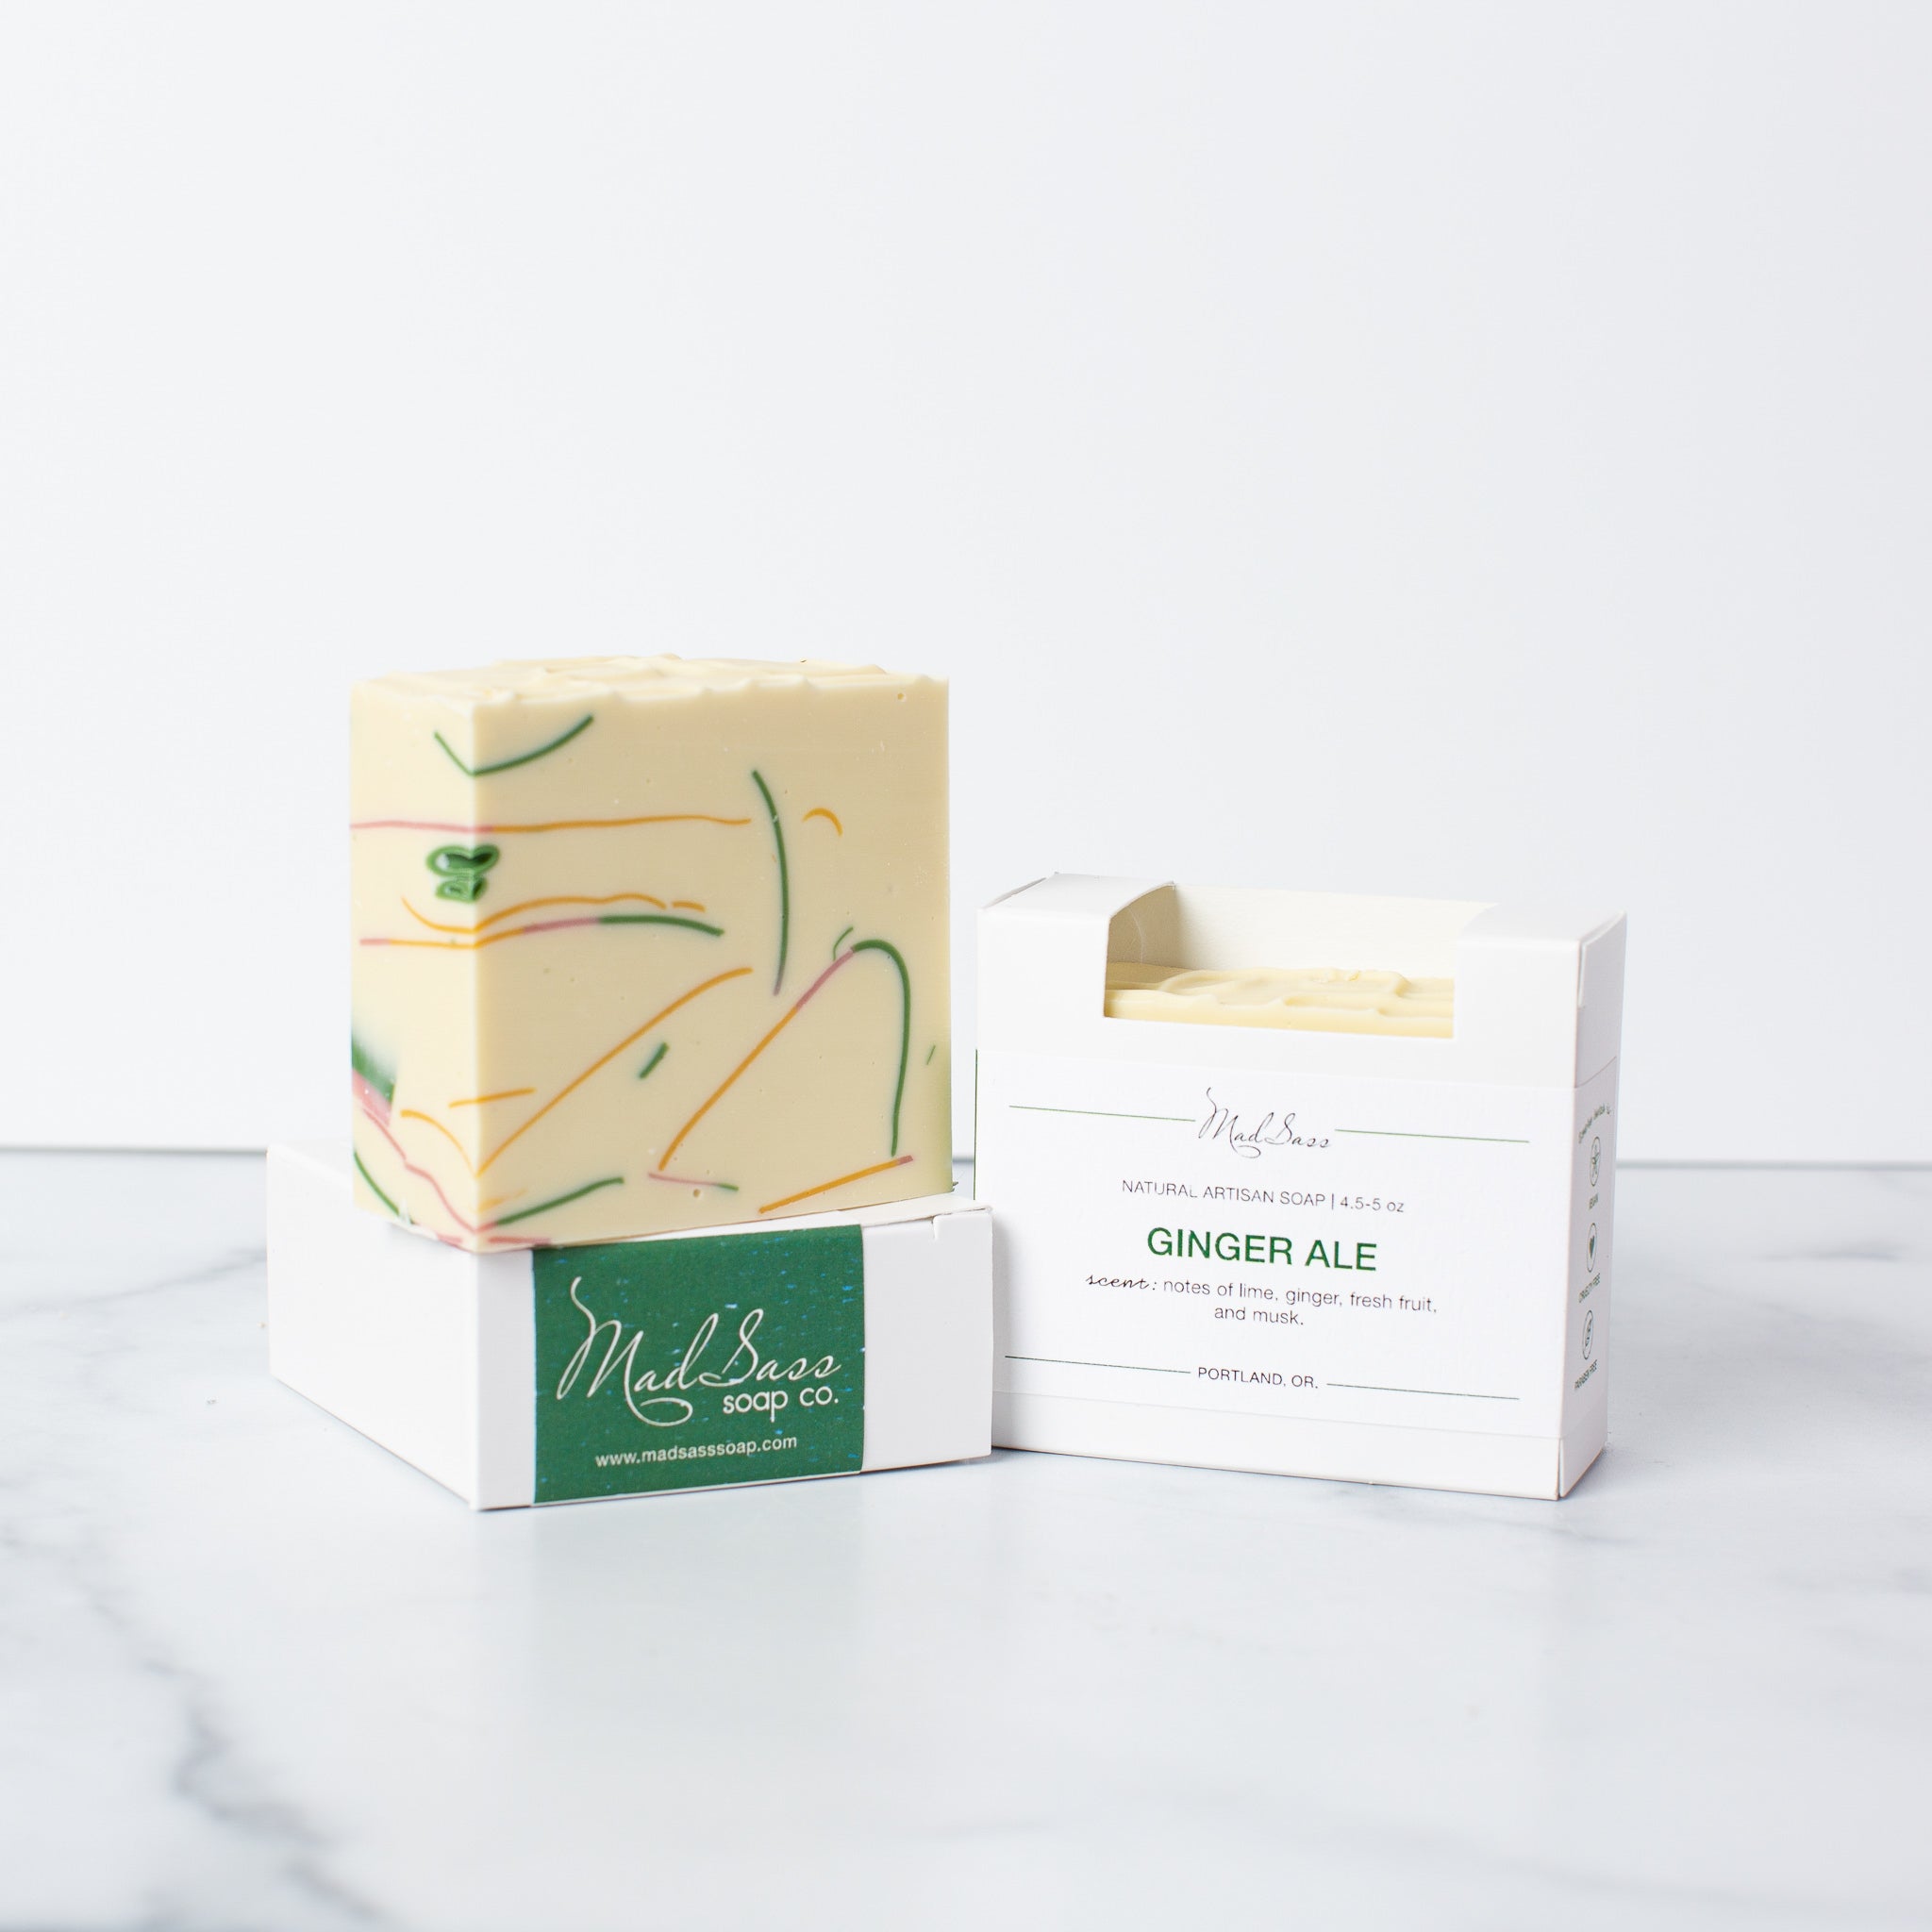 Two boxes of Ginger Ale soap and a bar of Ginger Ale soap on a white background. Ginger Ale is a creamy-white soap with green, yellow, and pink soap shavings embedded.